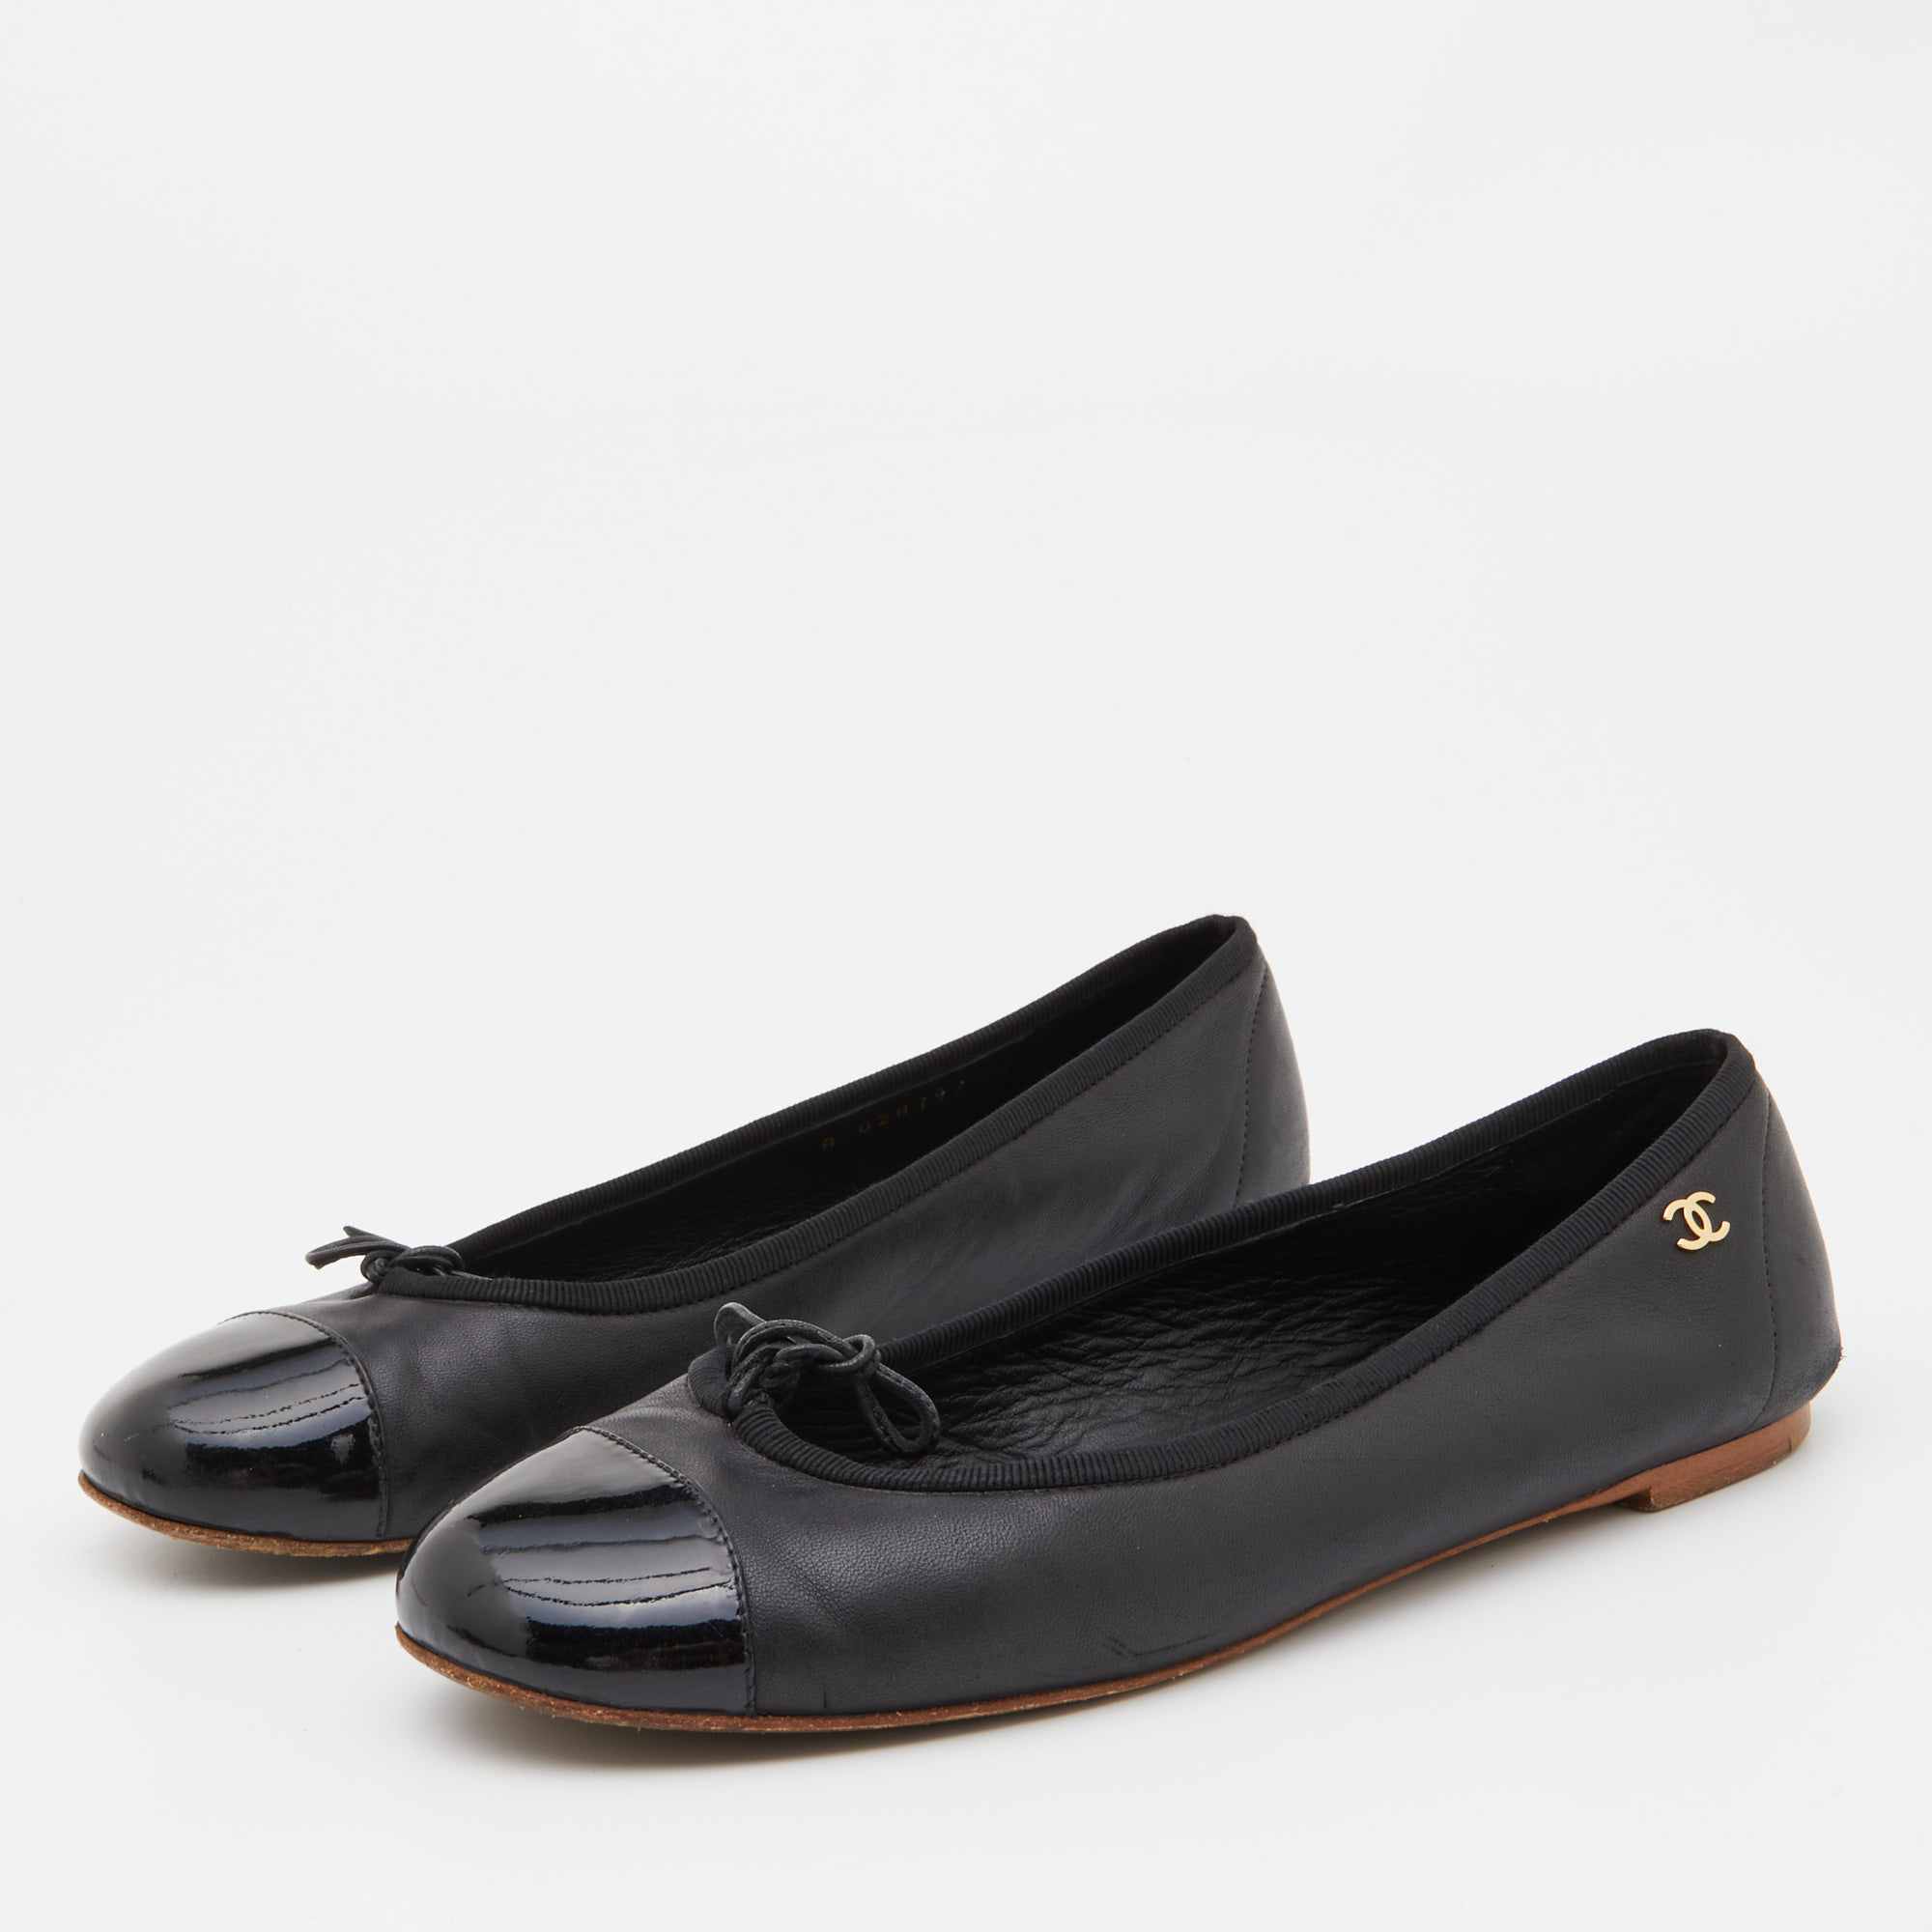 

Chanel Black Leather and Patent Cap Toe Bow CC Ballet Flats Size